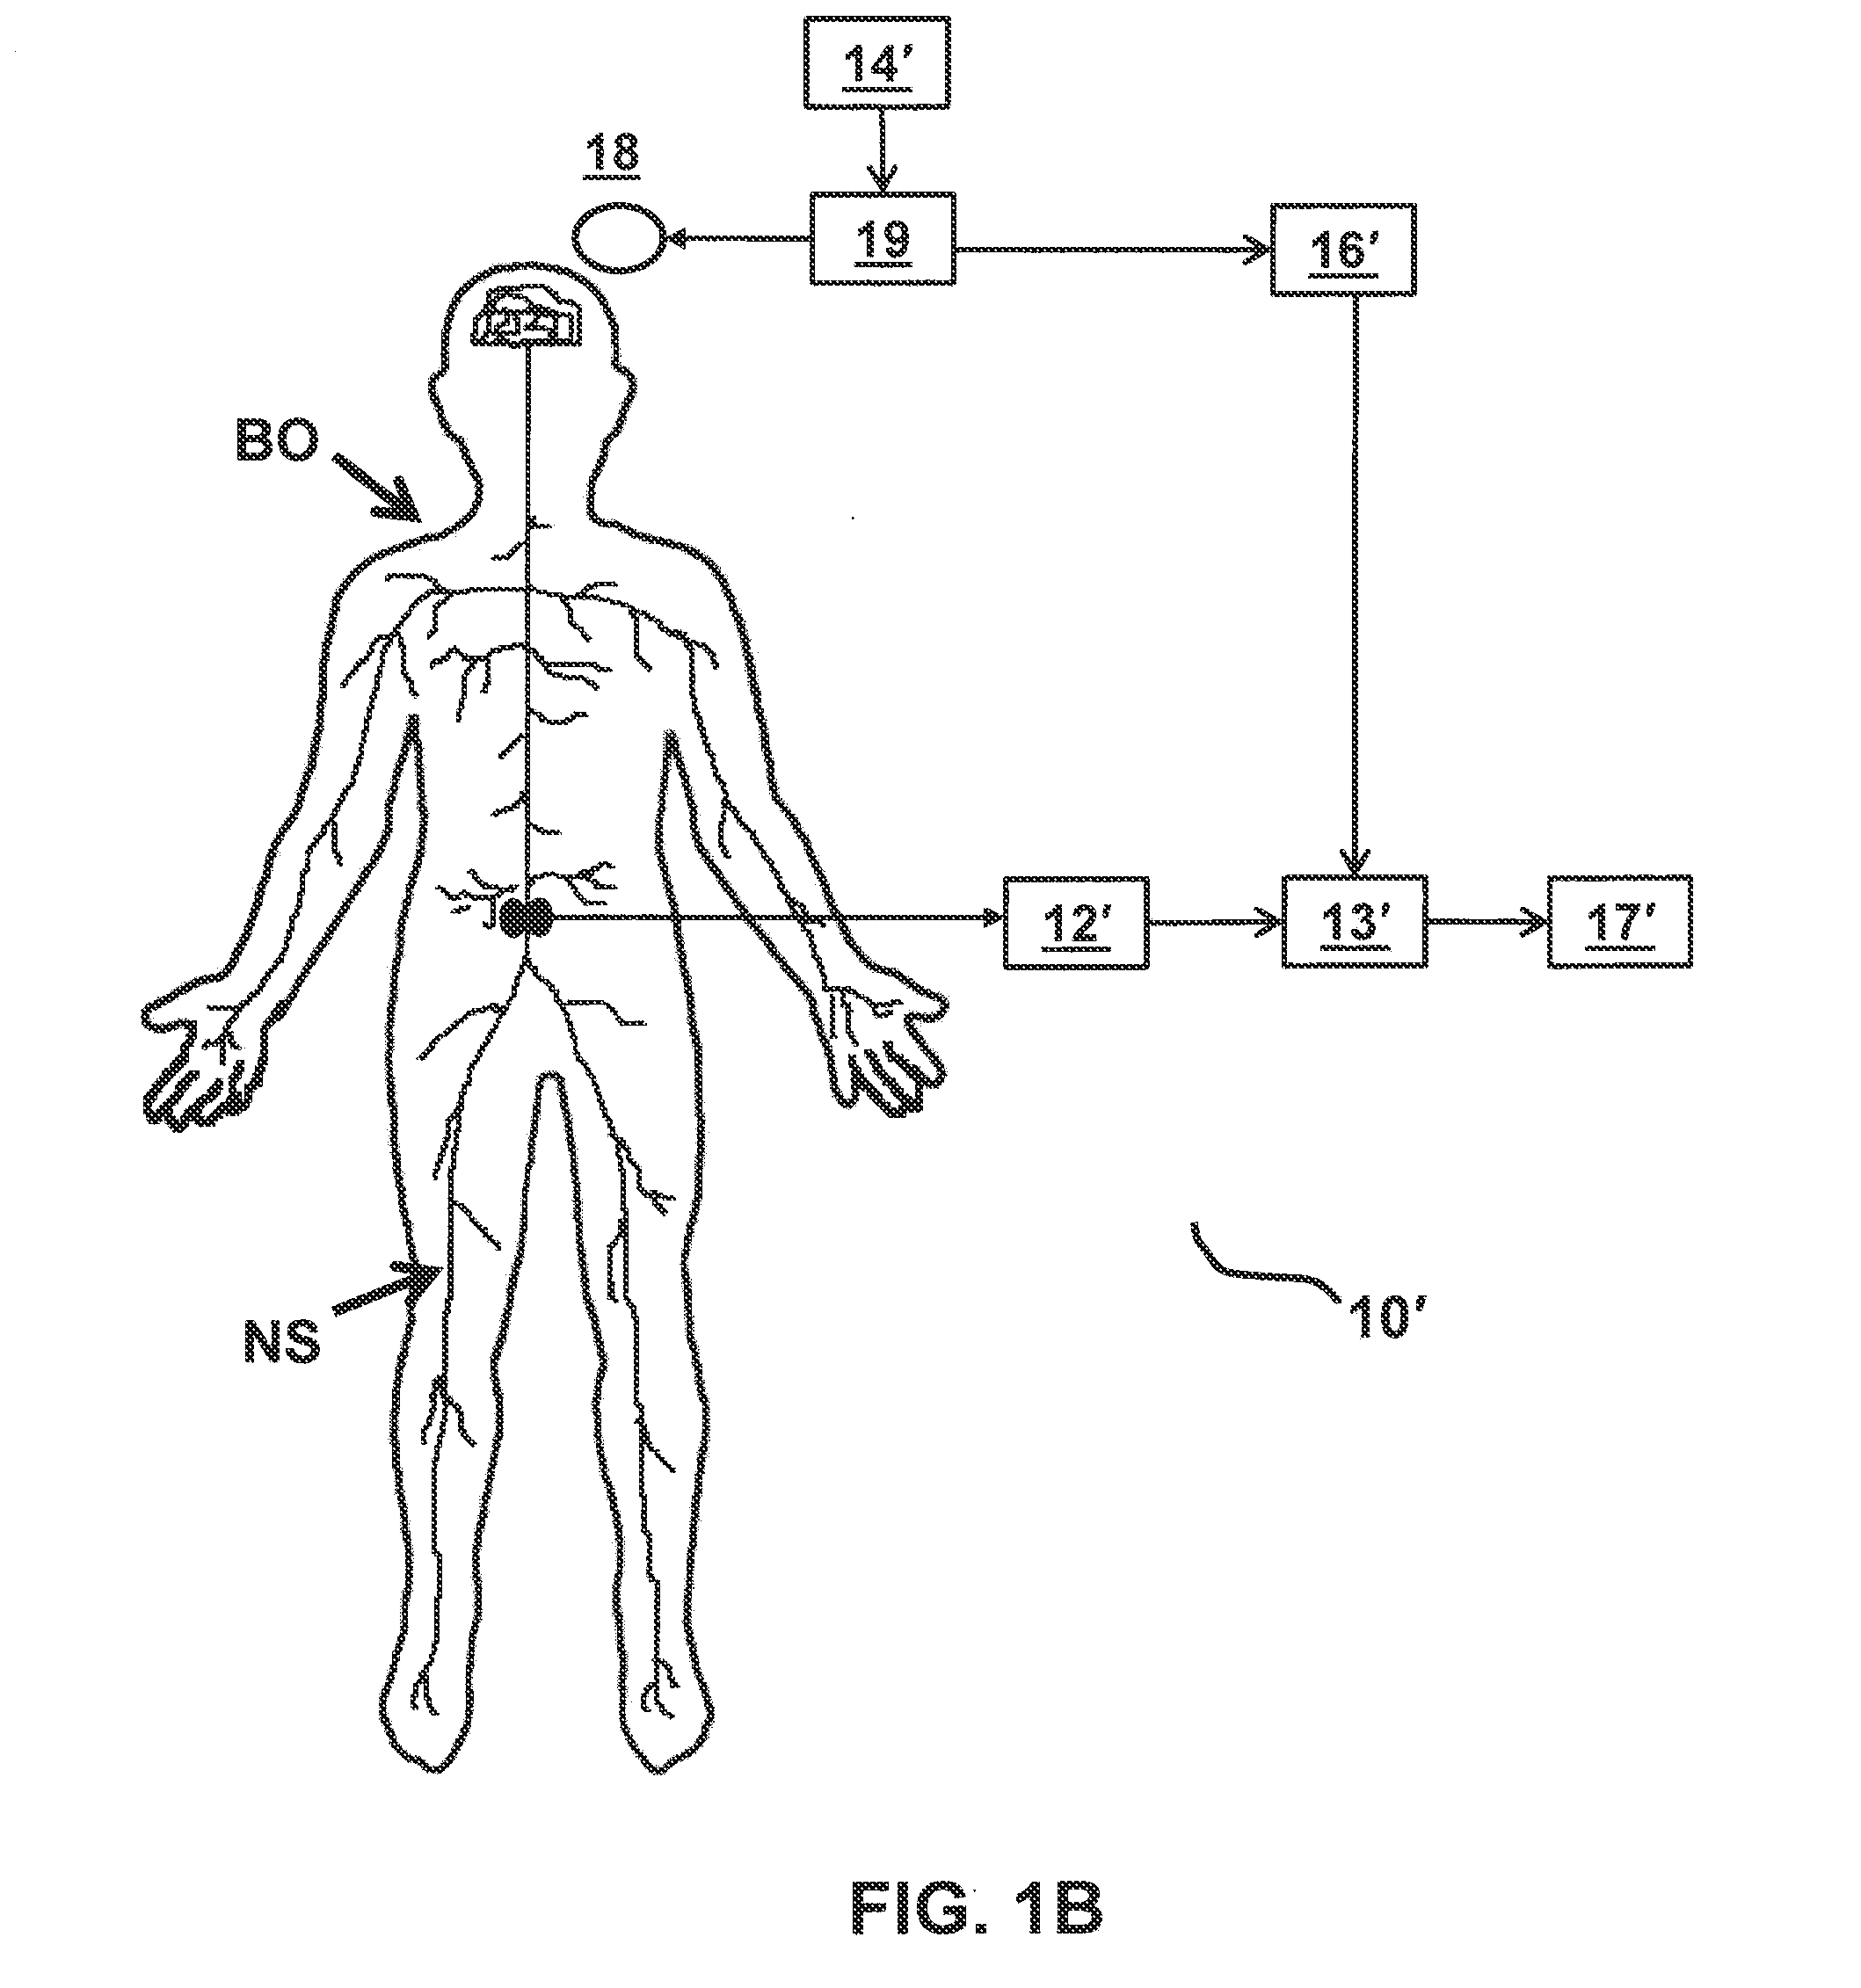 Systems and methods for monitoring muscle rehabilitation